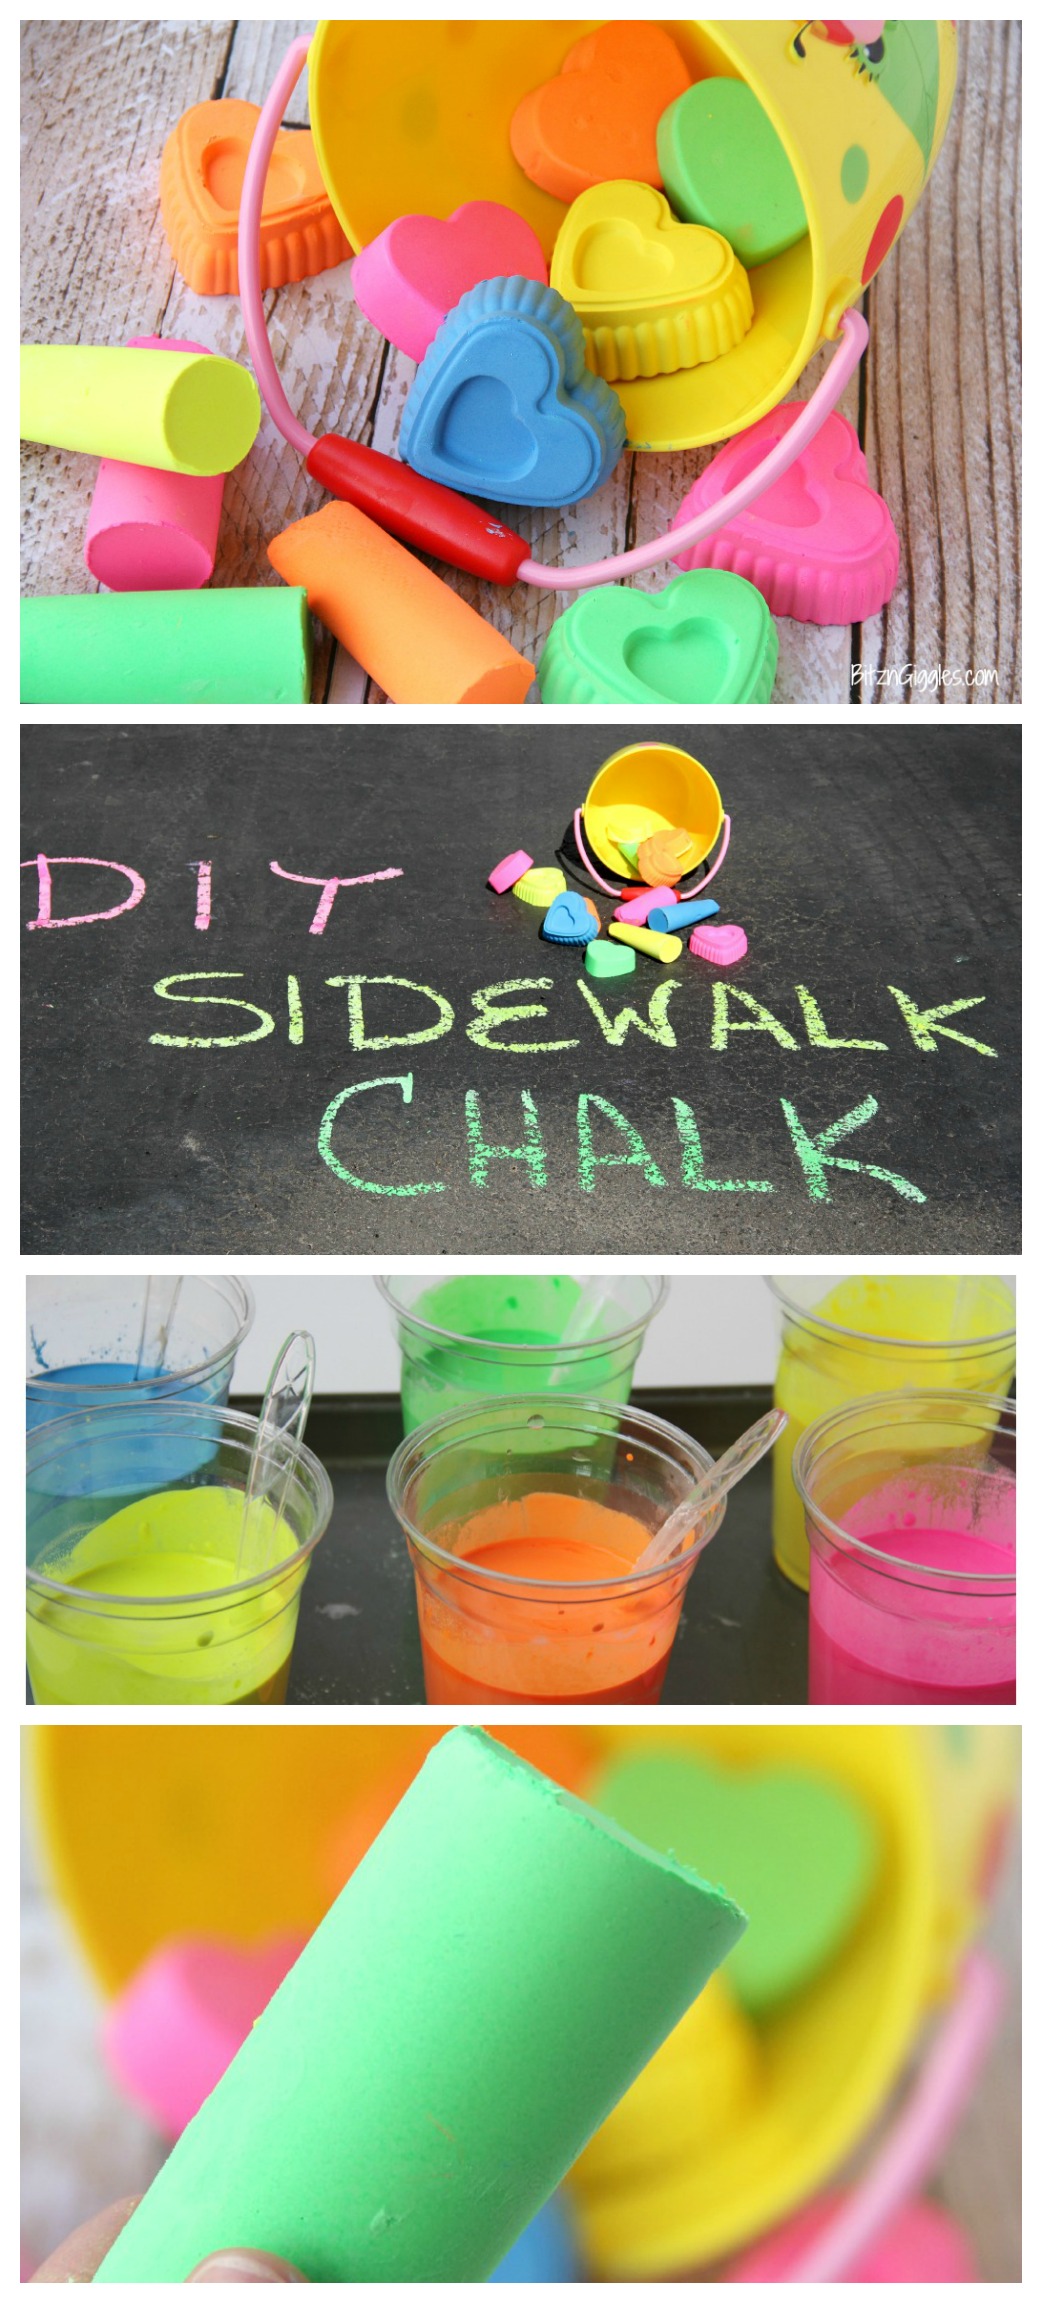 DIY Scented Sidewalk Chalk - Super easy to make and draws better and more vibrant than even store-bought chalk!